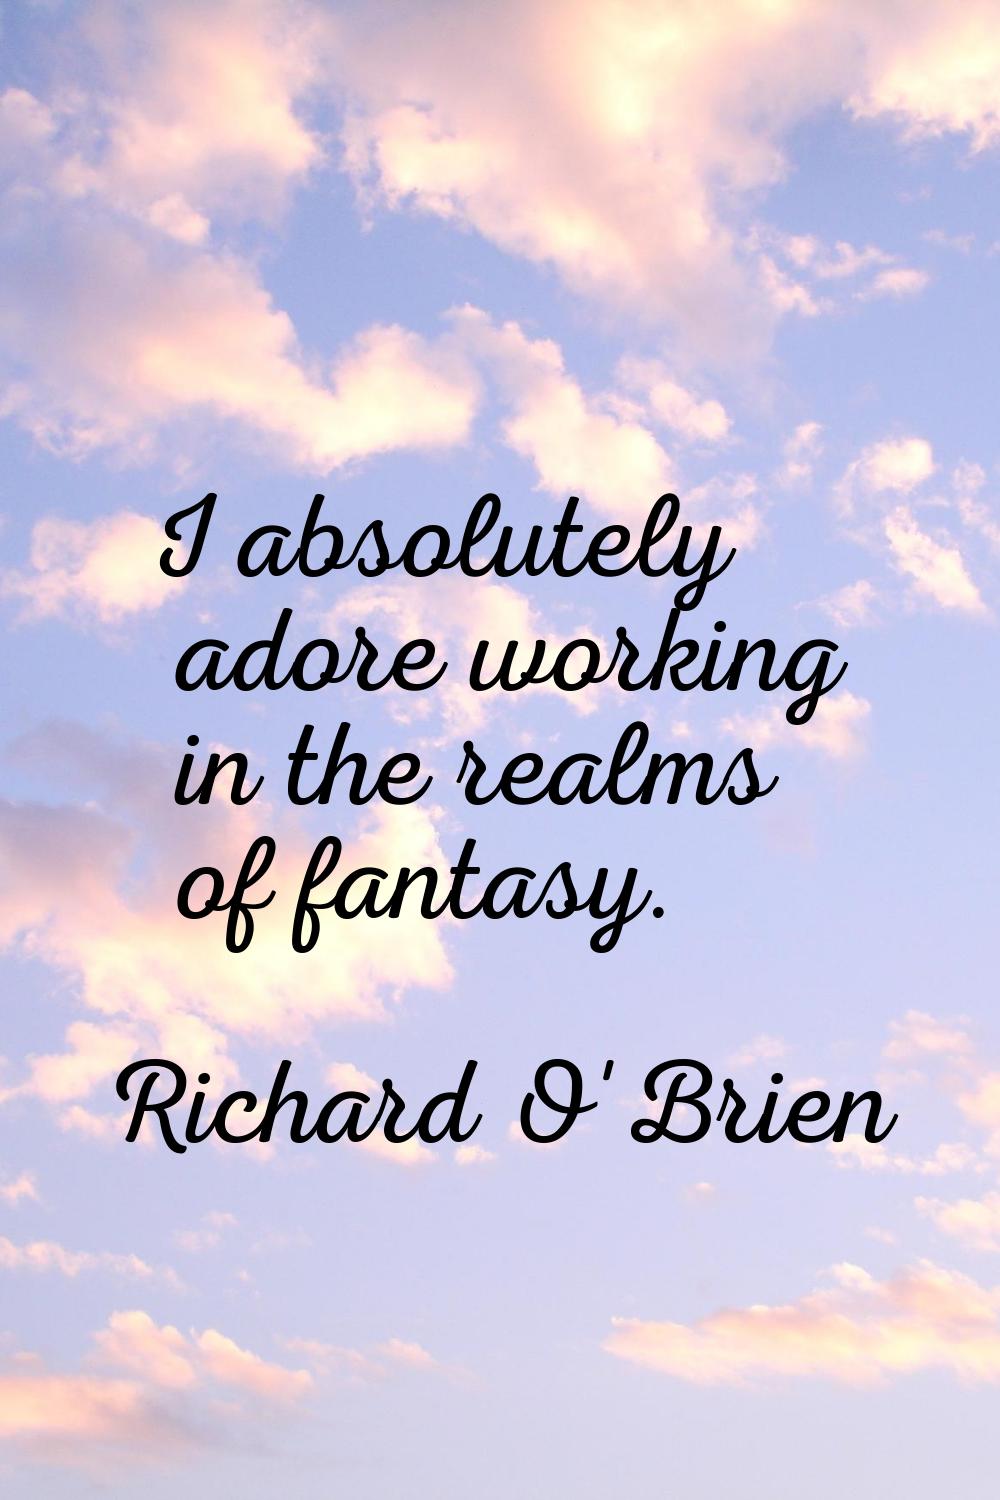 I absolutely adore working in the realms of fantasy.